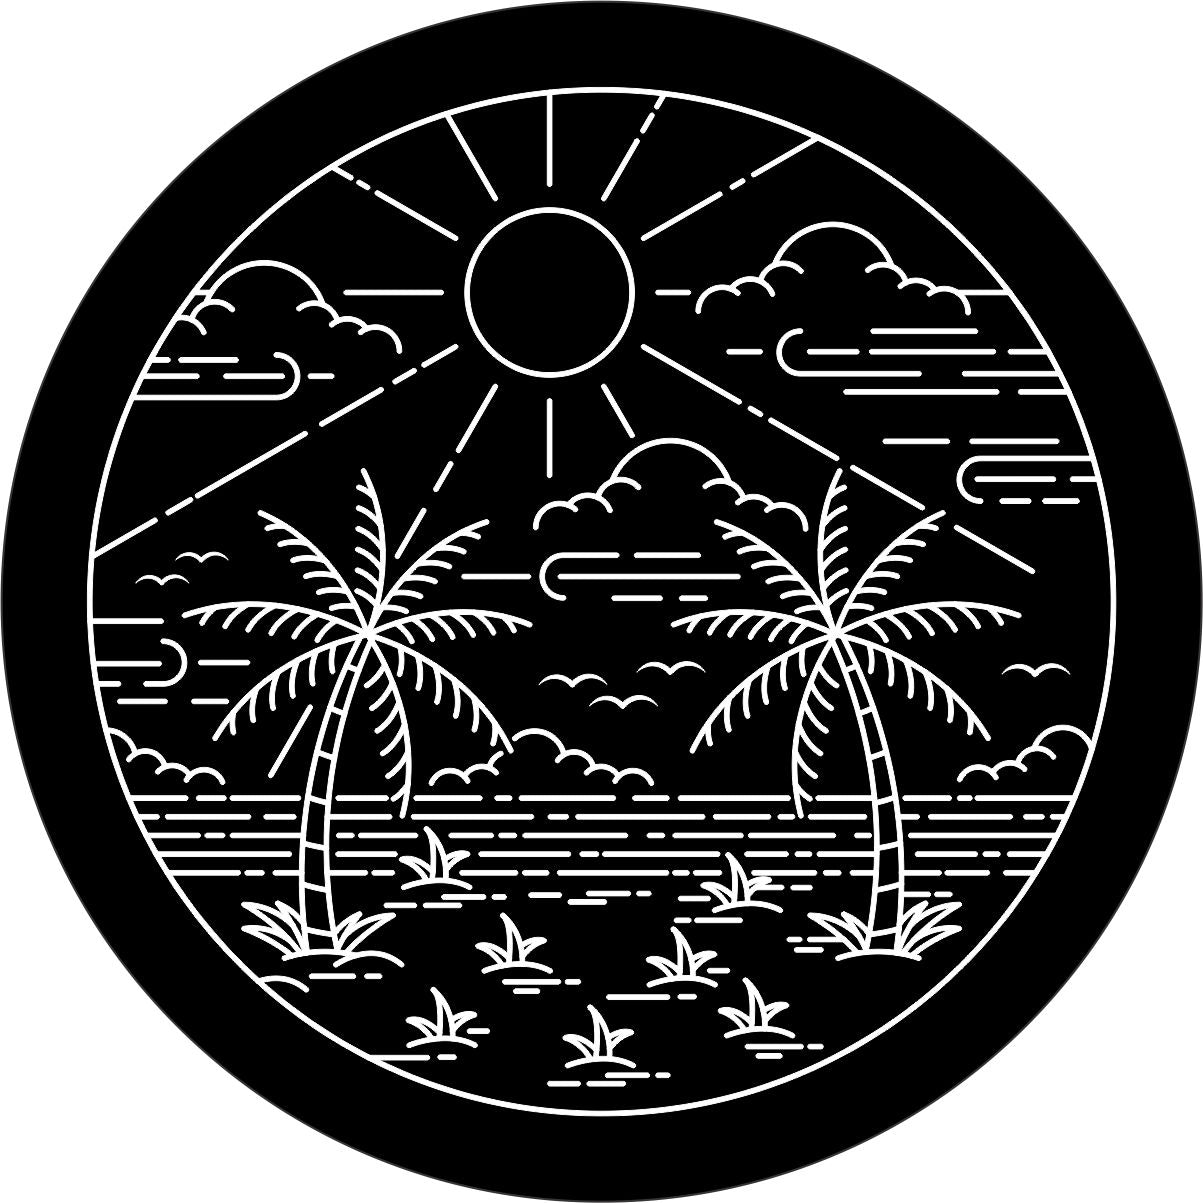 Black vinyl spare tire cover mock up design of a tropical beach made from white line art design. Sun shining down over the water and palm trees on the beach.